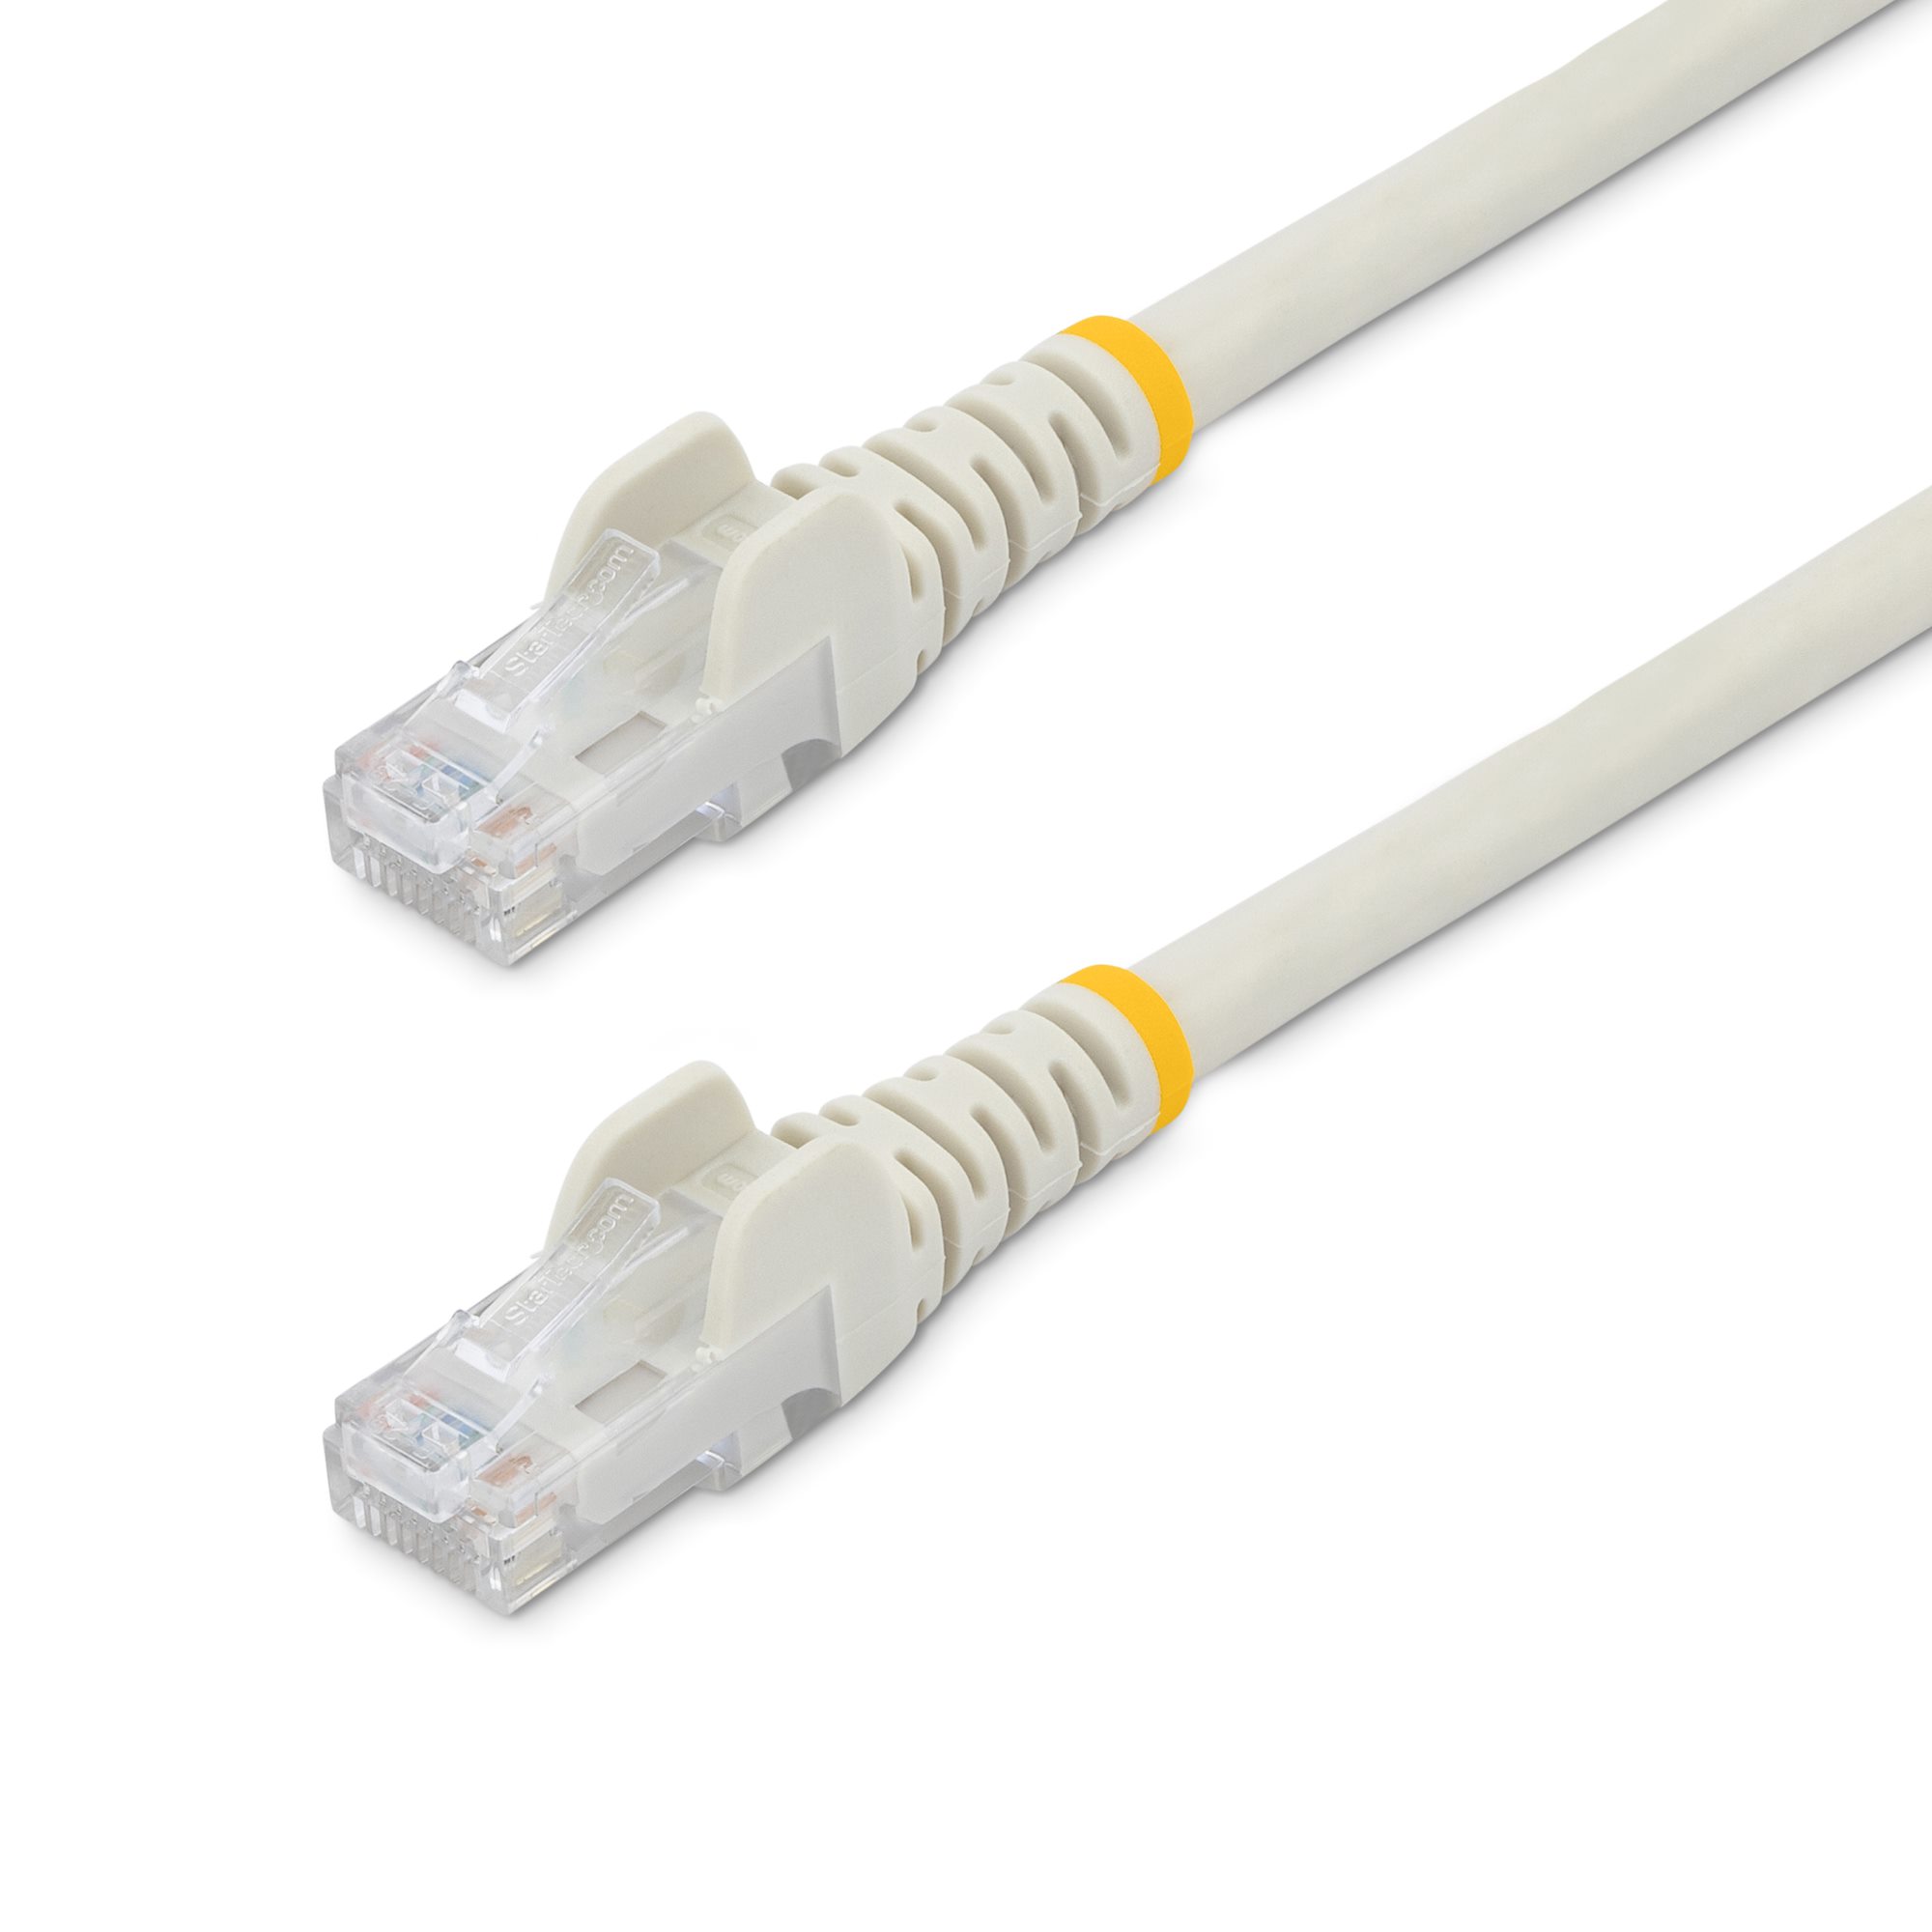 Cat6 Ethernet Cable - 6 ft 10-Pack (1.8m) Cat 6 RJ45, LAN, Utp, Network,  Patch, Internet Cable - 6 feet